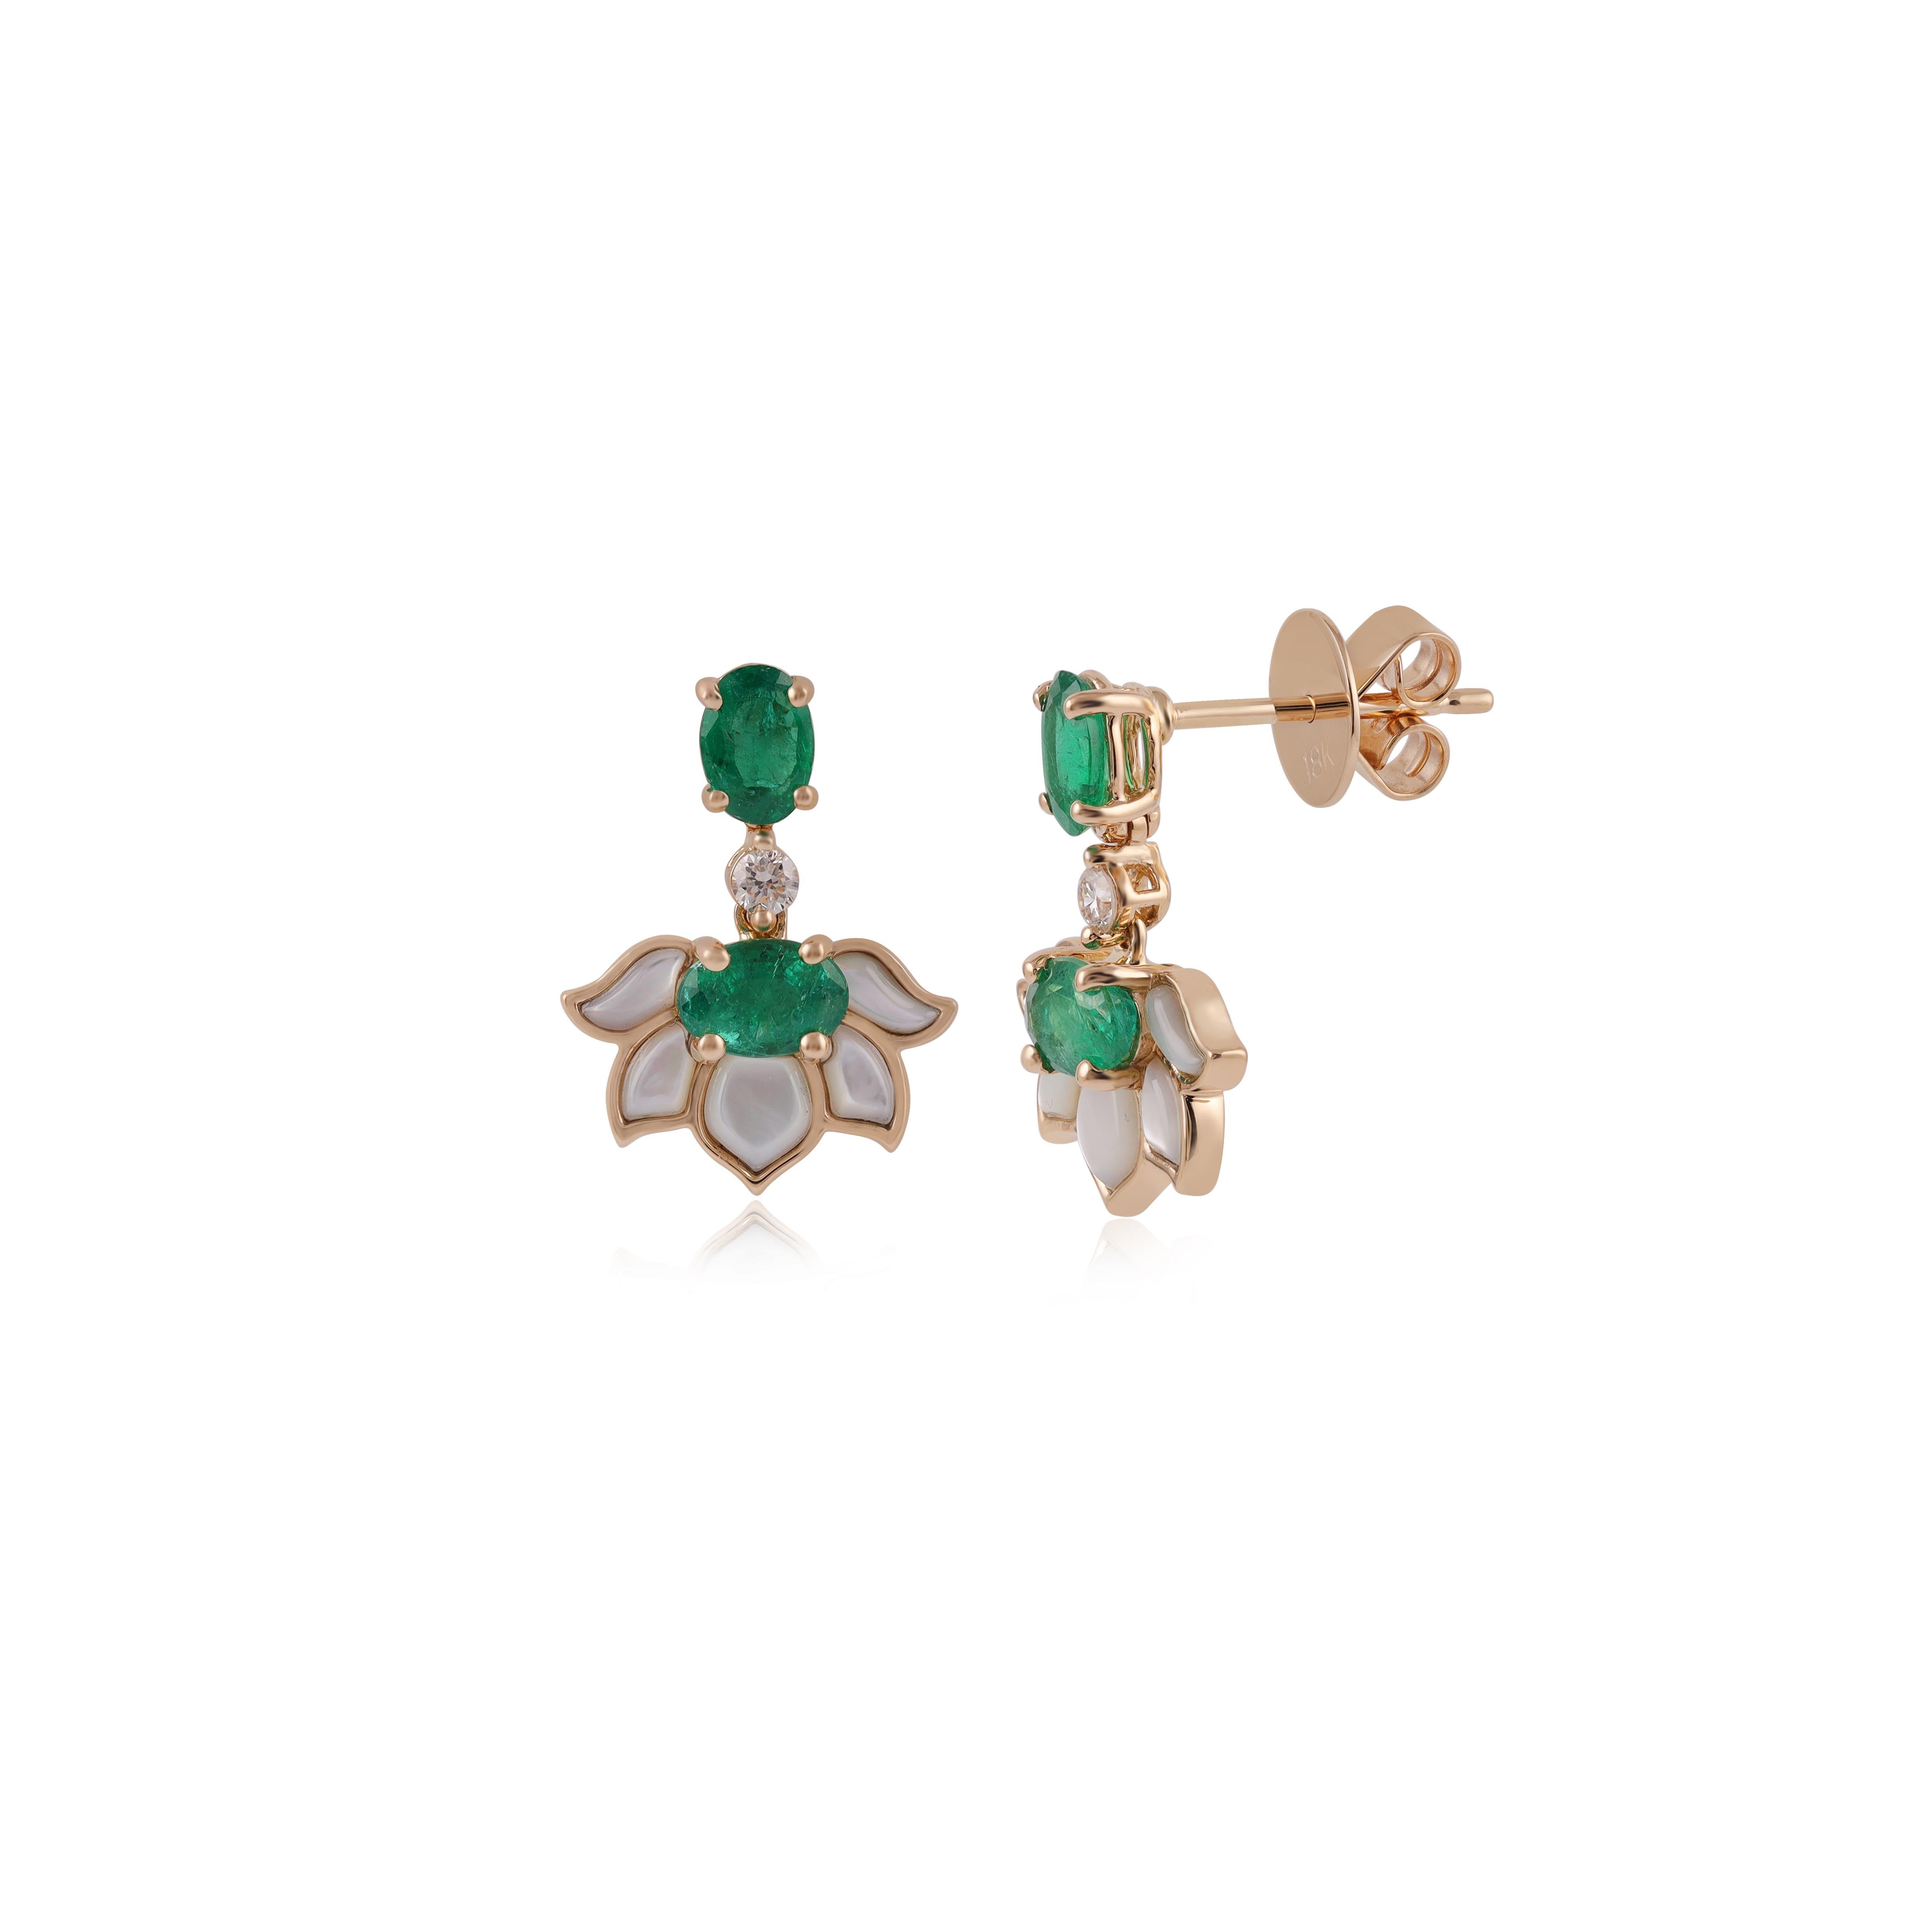 Contemporary 1.77 Carat Emerald, Mother of Pearl & Round Diamonds Earrings in 18k Yellow Gold For Sale